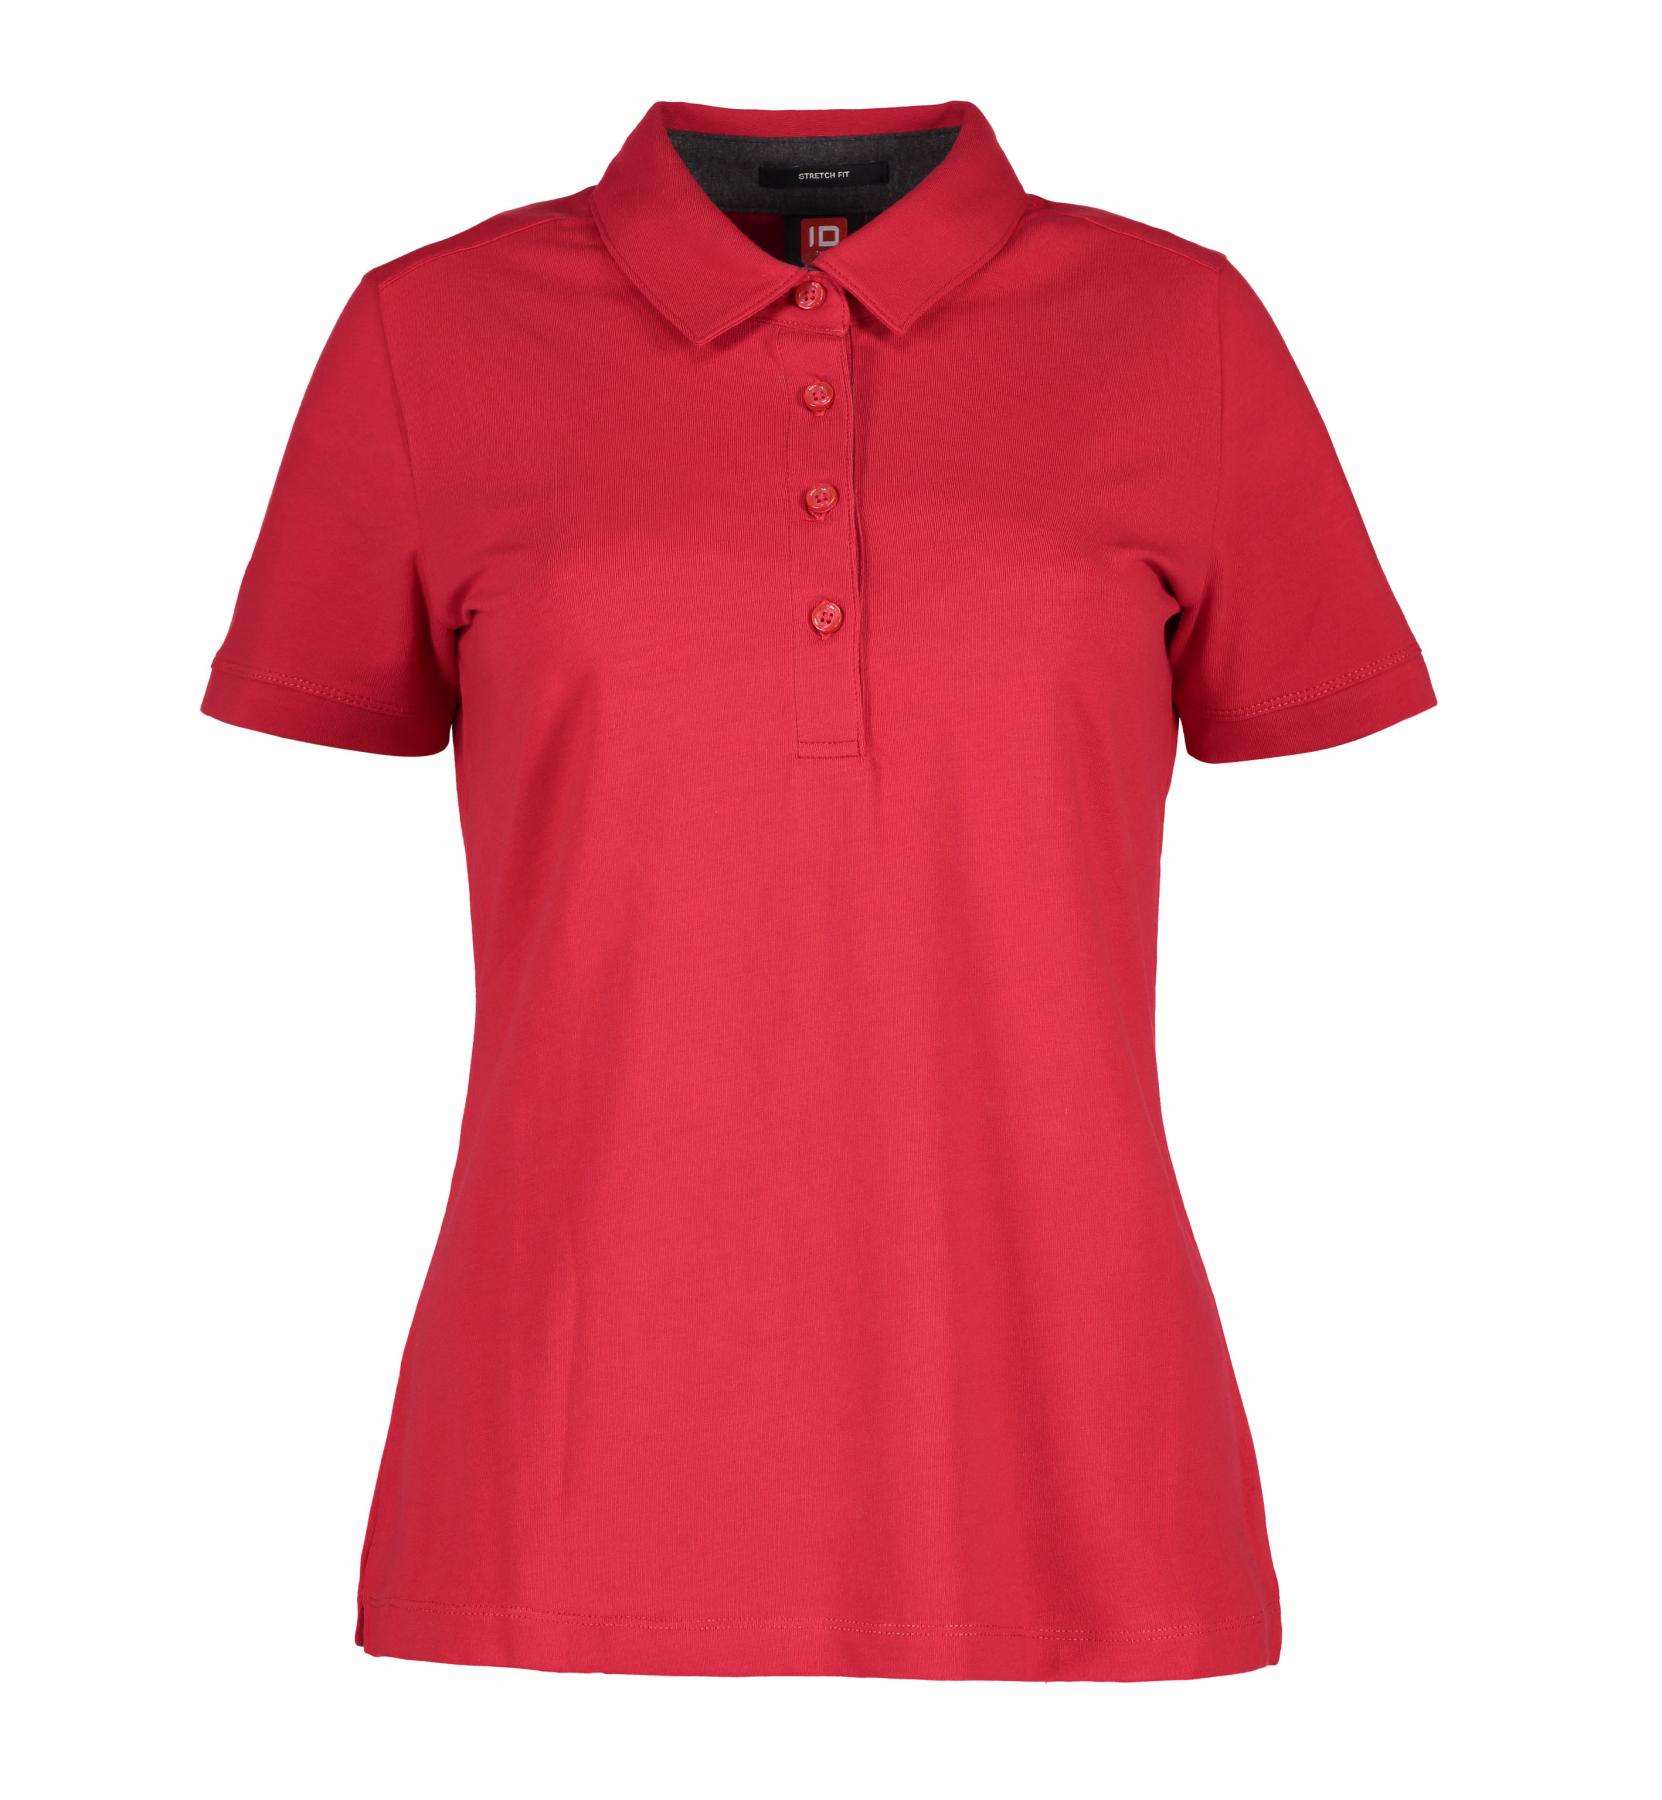 Ladies Business Jersey Polo Shirt 185 g/m² ID Identity® Red XS